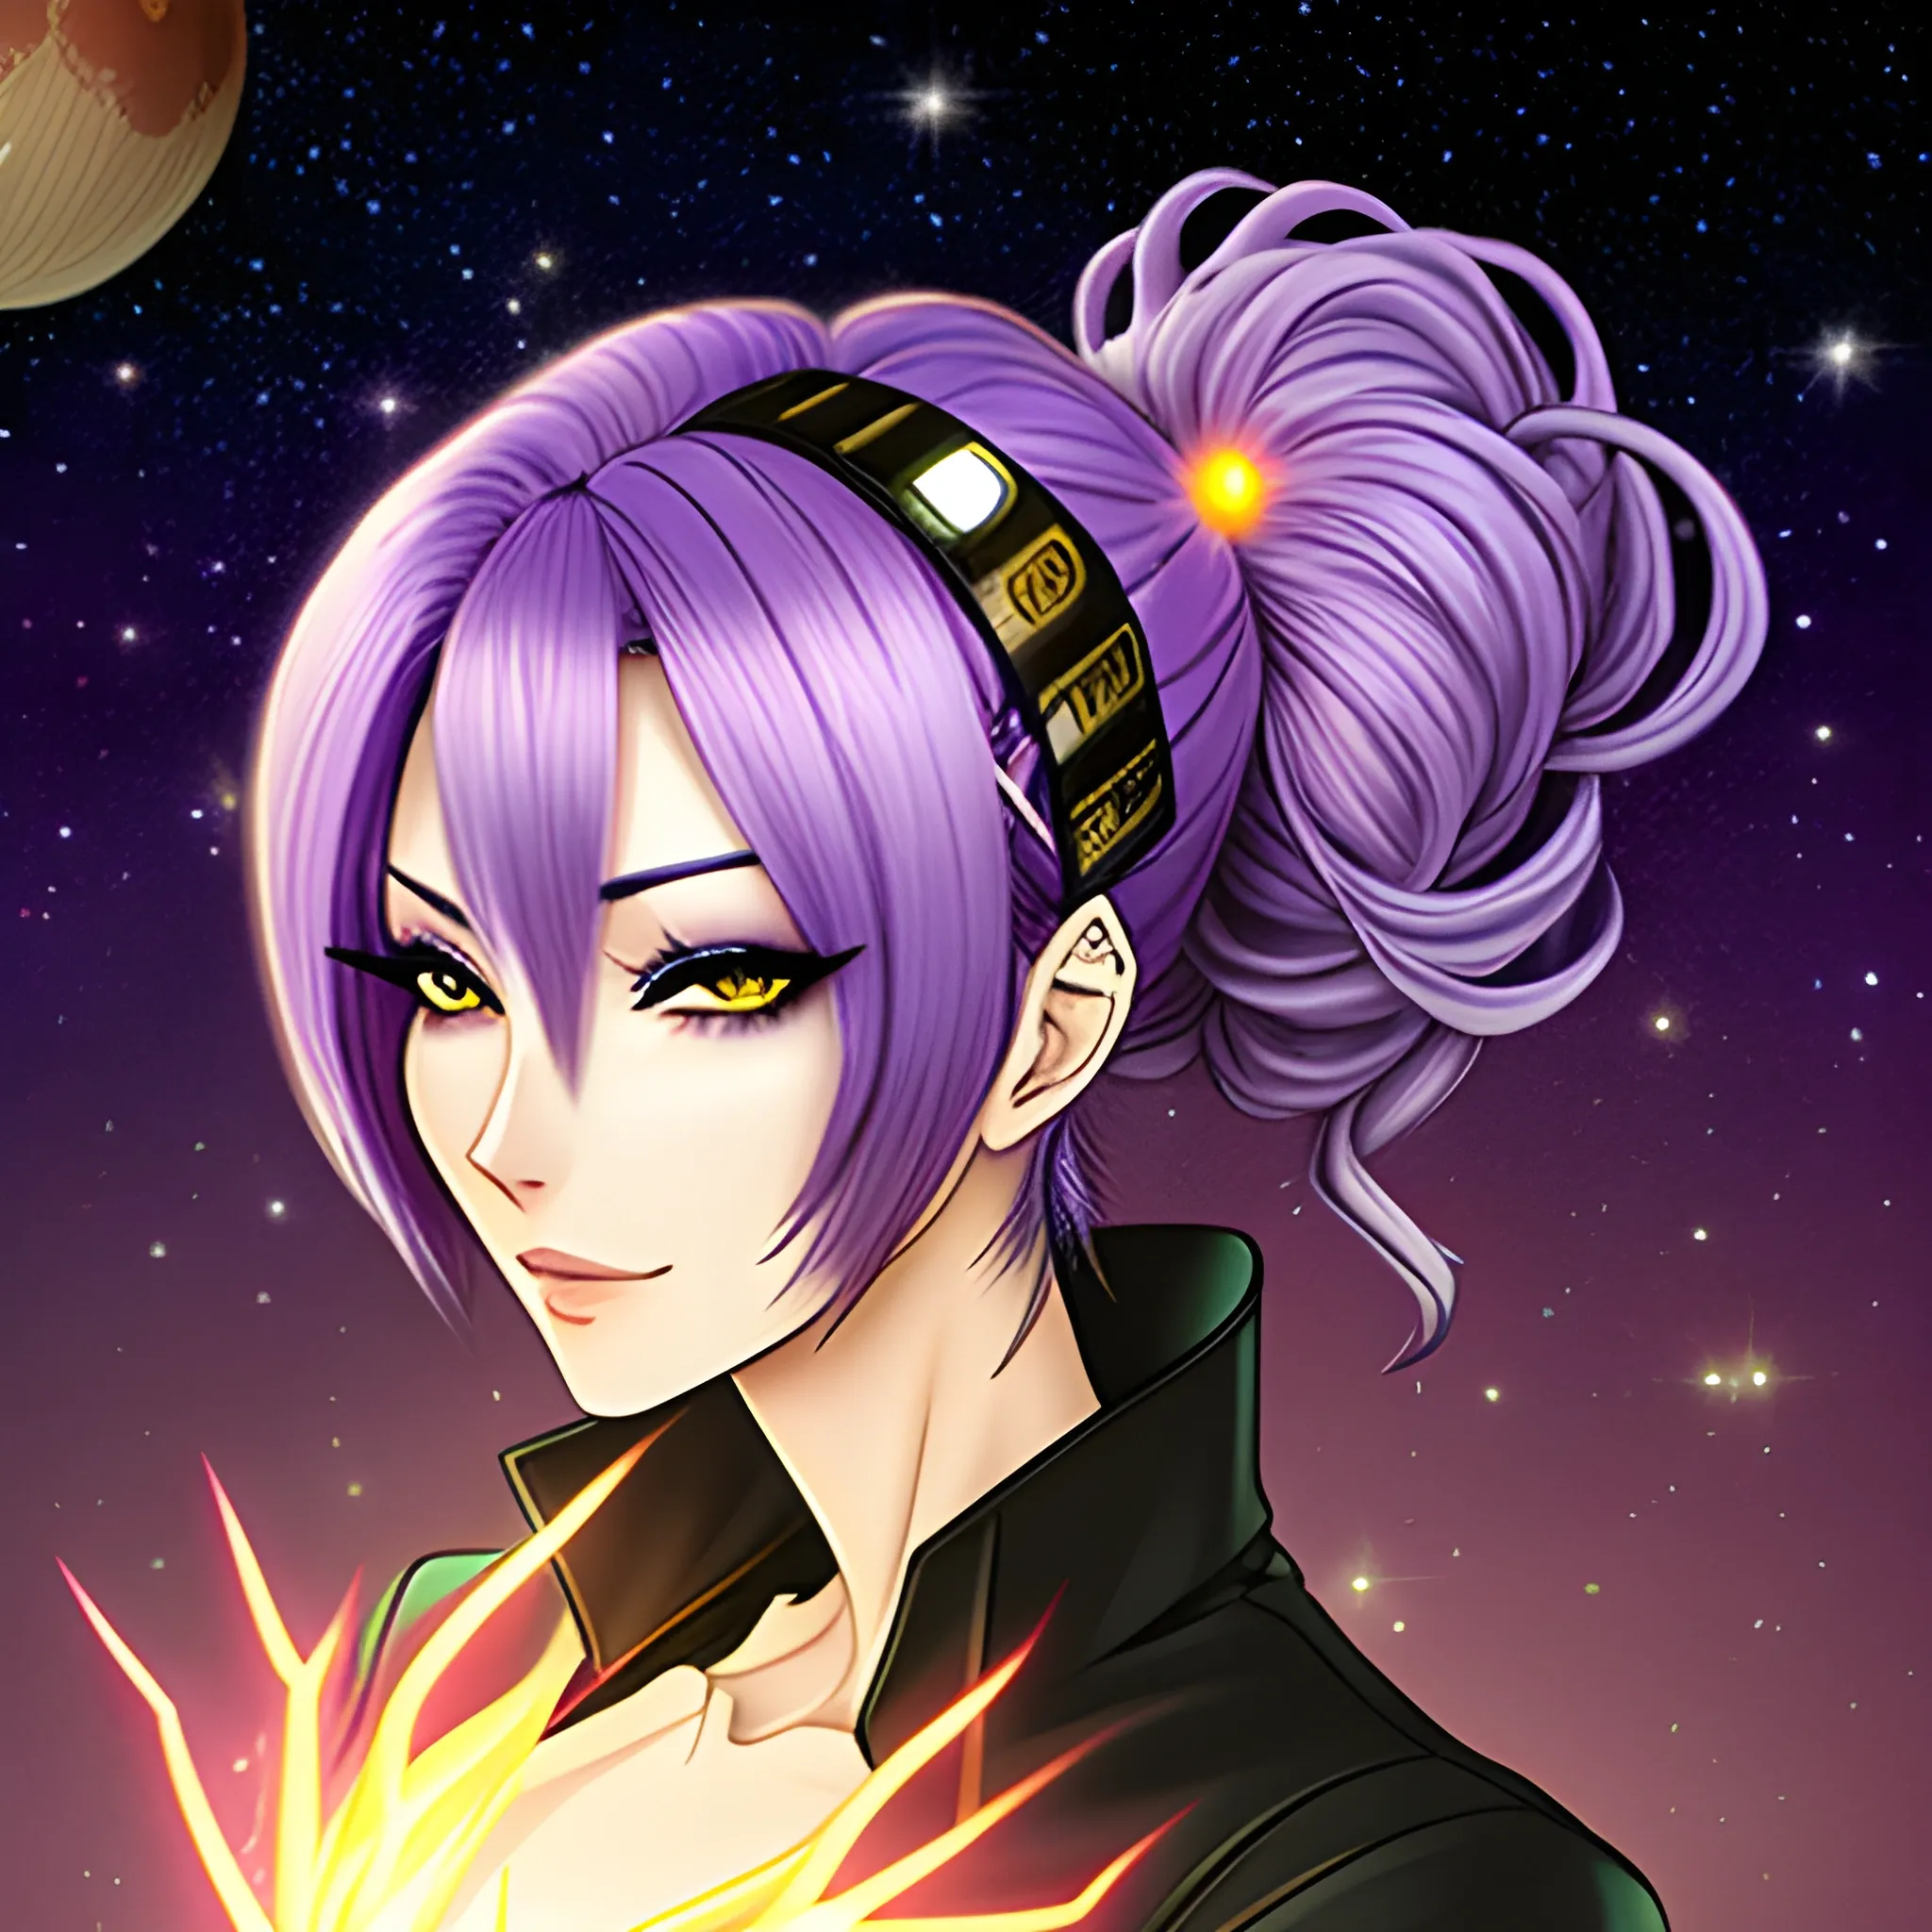 Beautiful anime girl with purple hair, yellow glowing moon hairclip, cosmic clothes